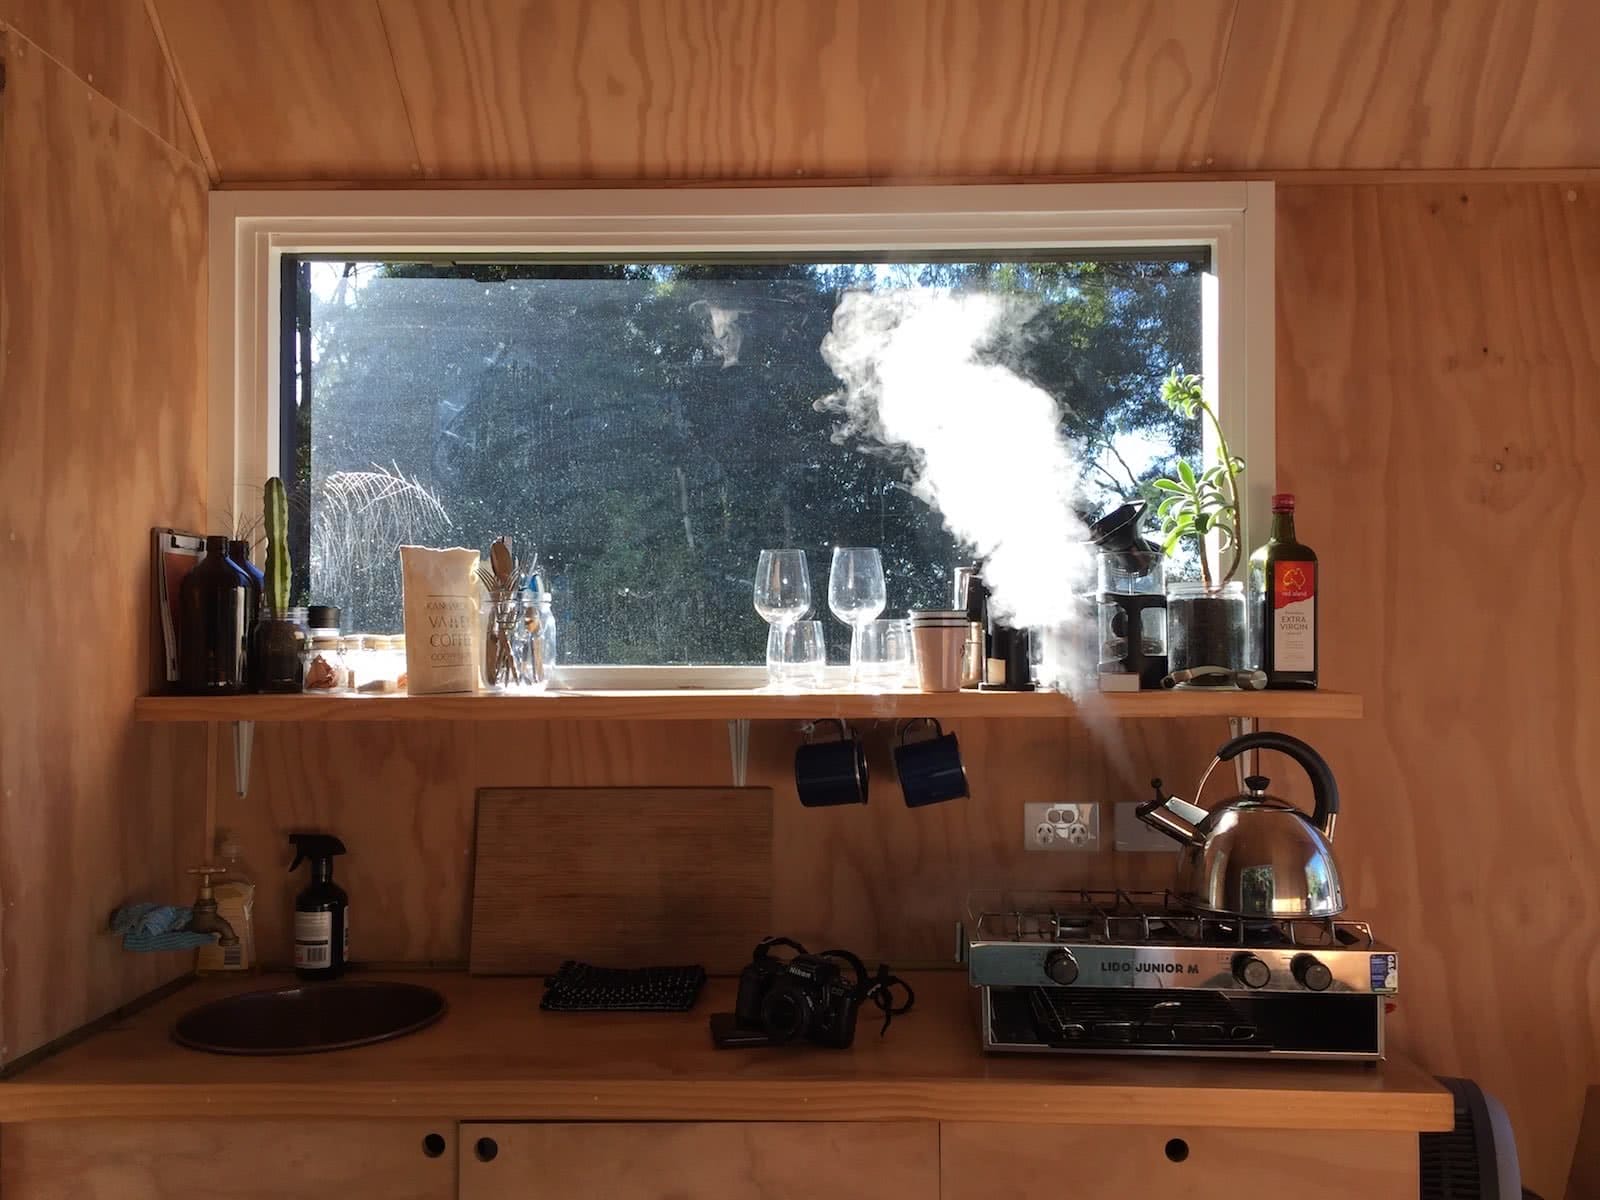 A Notification Vacation // The Cabin Series With Unyoked, photo by Tim Ashelford, miguel, unyoked cabin, coffee, kettle, steam